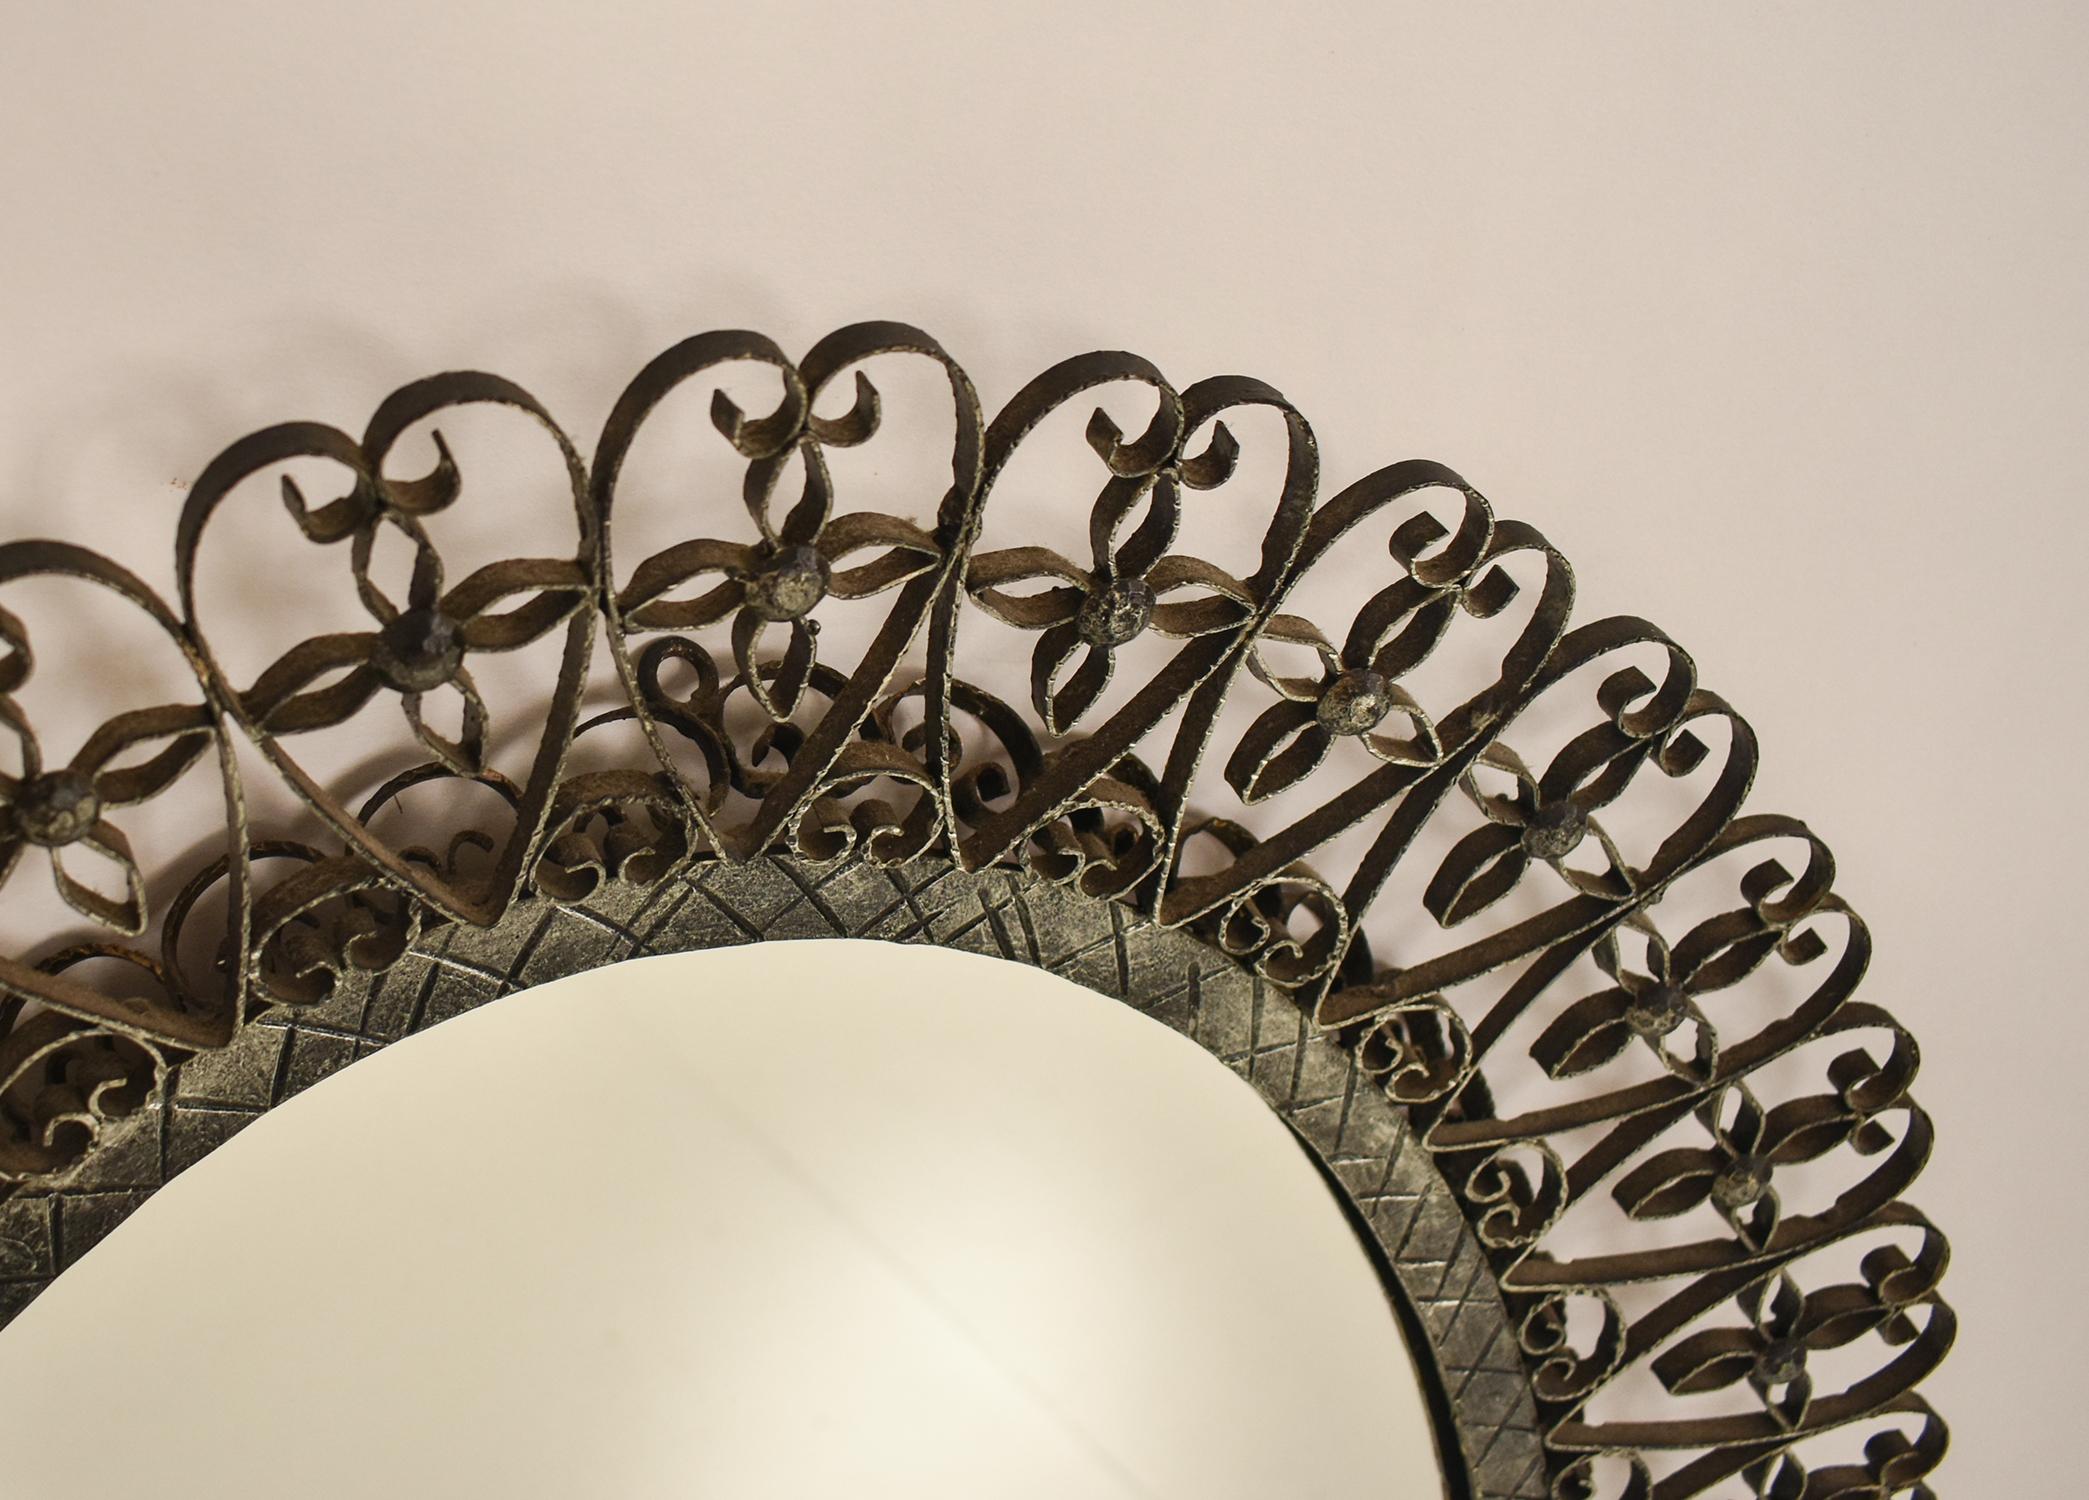 Oval mirror, wrought iron. Spain 1970's
Patinated in aged silver color. Nice patina.
Successful complement in a classic or contemporary environment.
Total measurements: Heiht 78cm, Width 61cm. deep 5cm.
Mirror measurements: Height 57cm. Width 35cm.
​